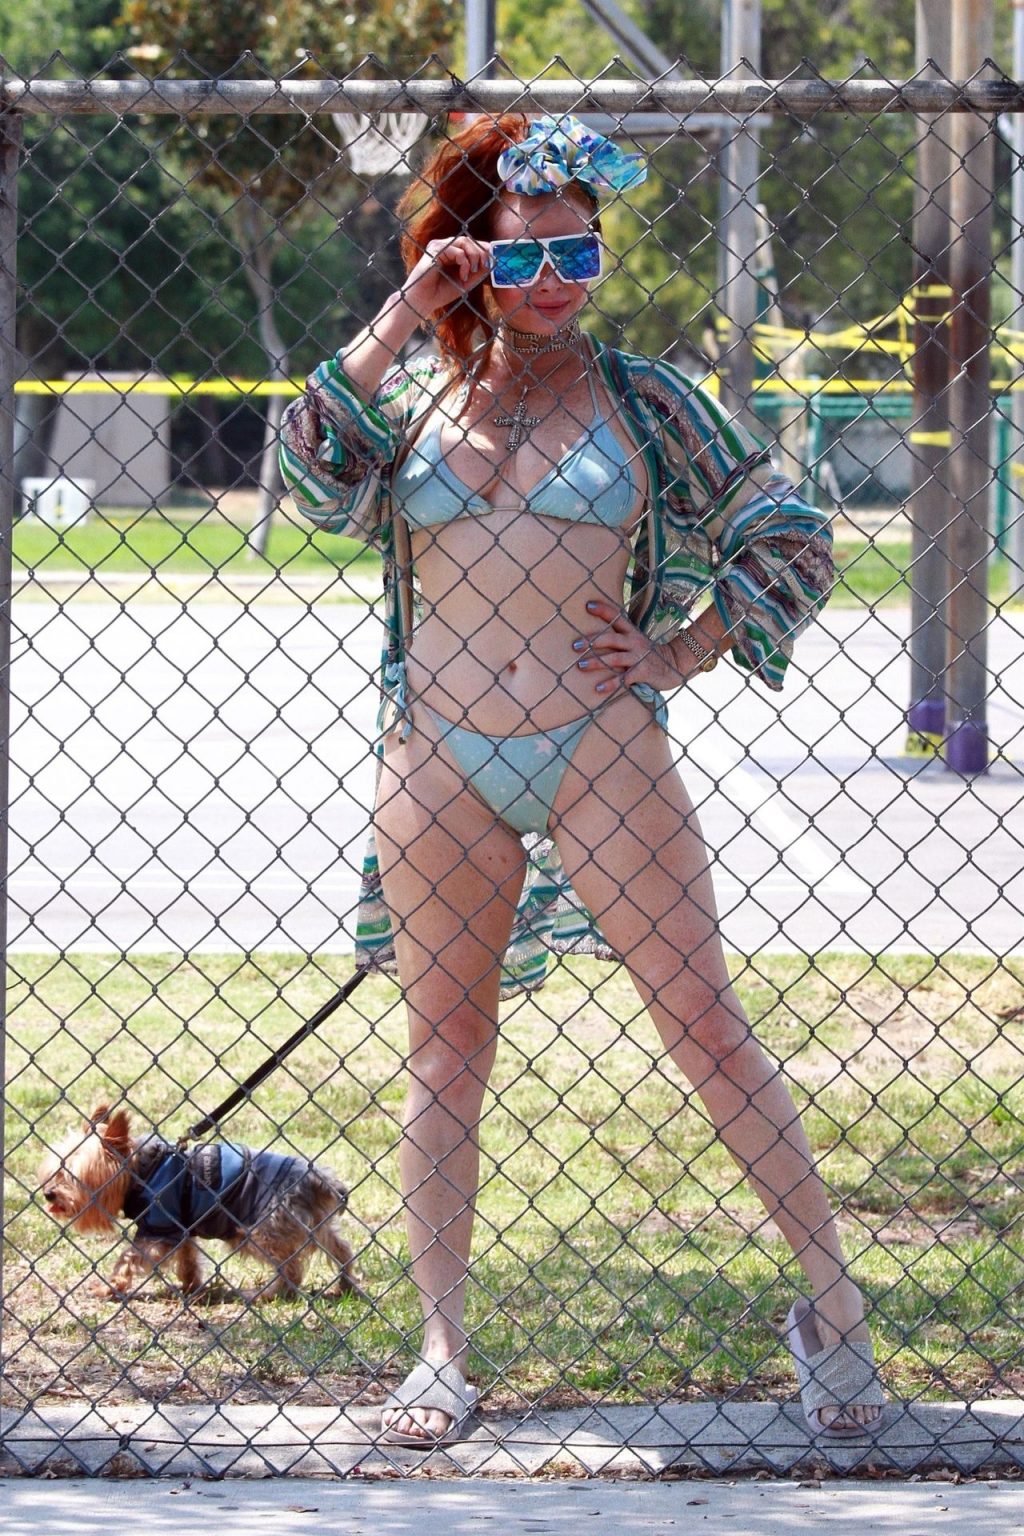 Phoebe Price Poses in a Bikini at a Local Park in LA (73 Photos)